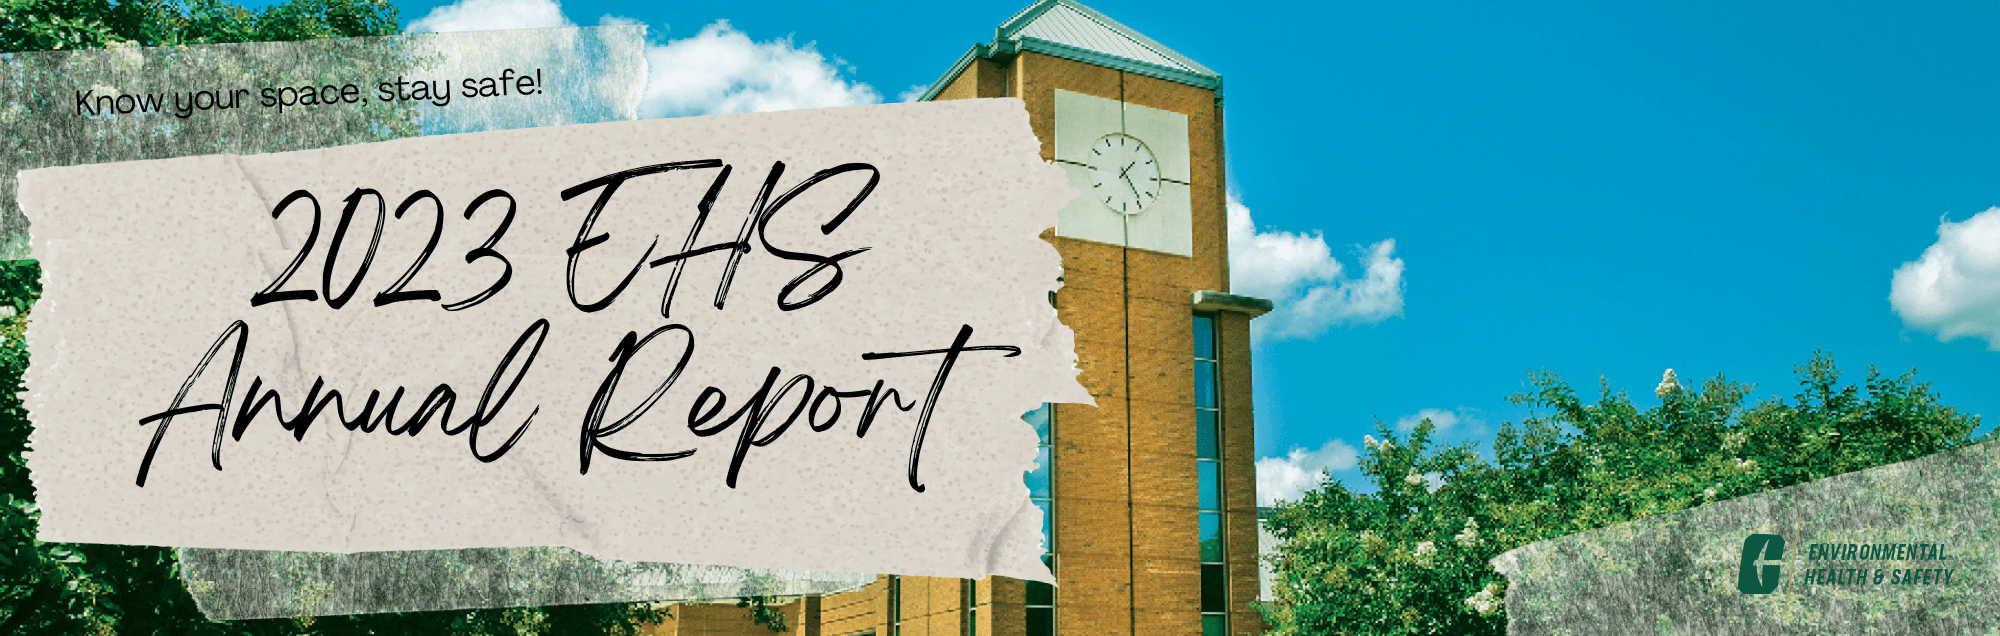 2023 EHS Annual Report